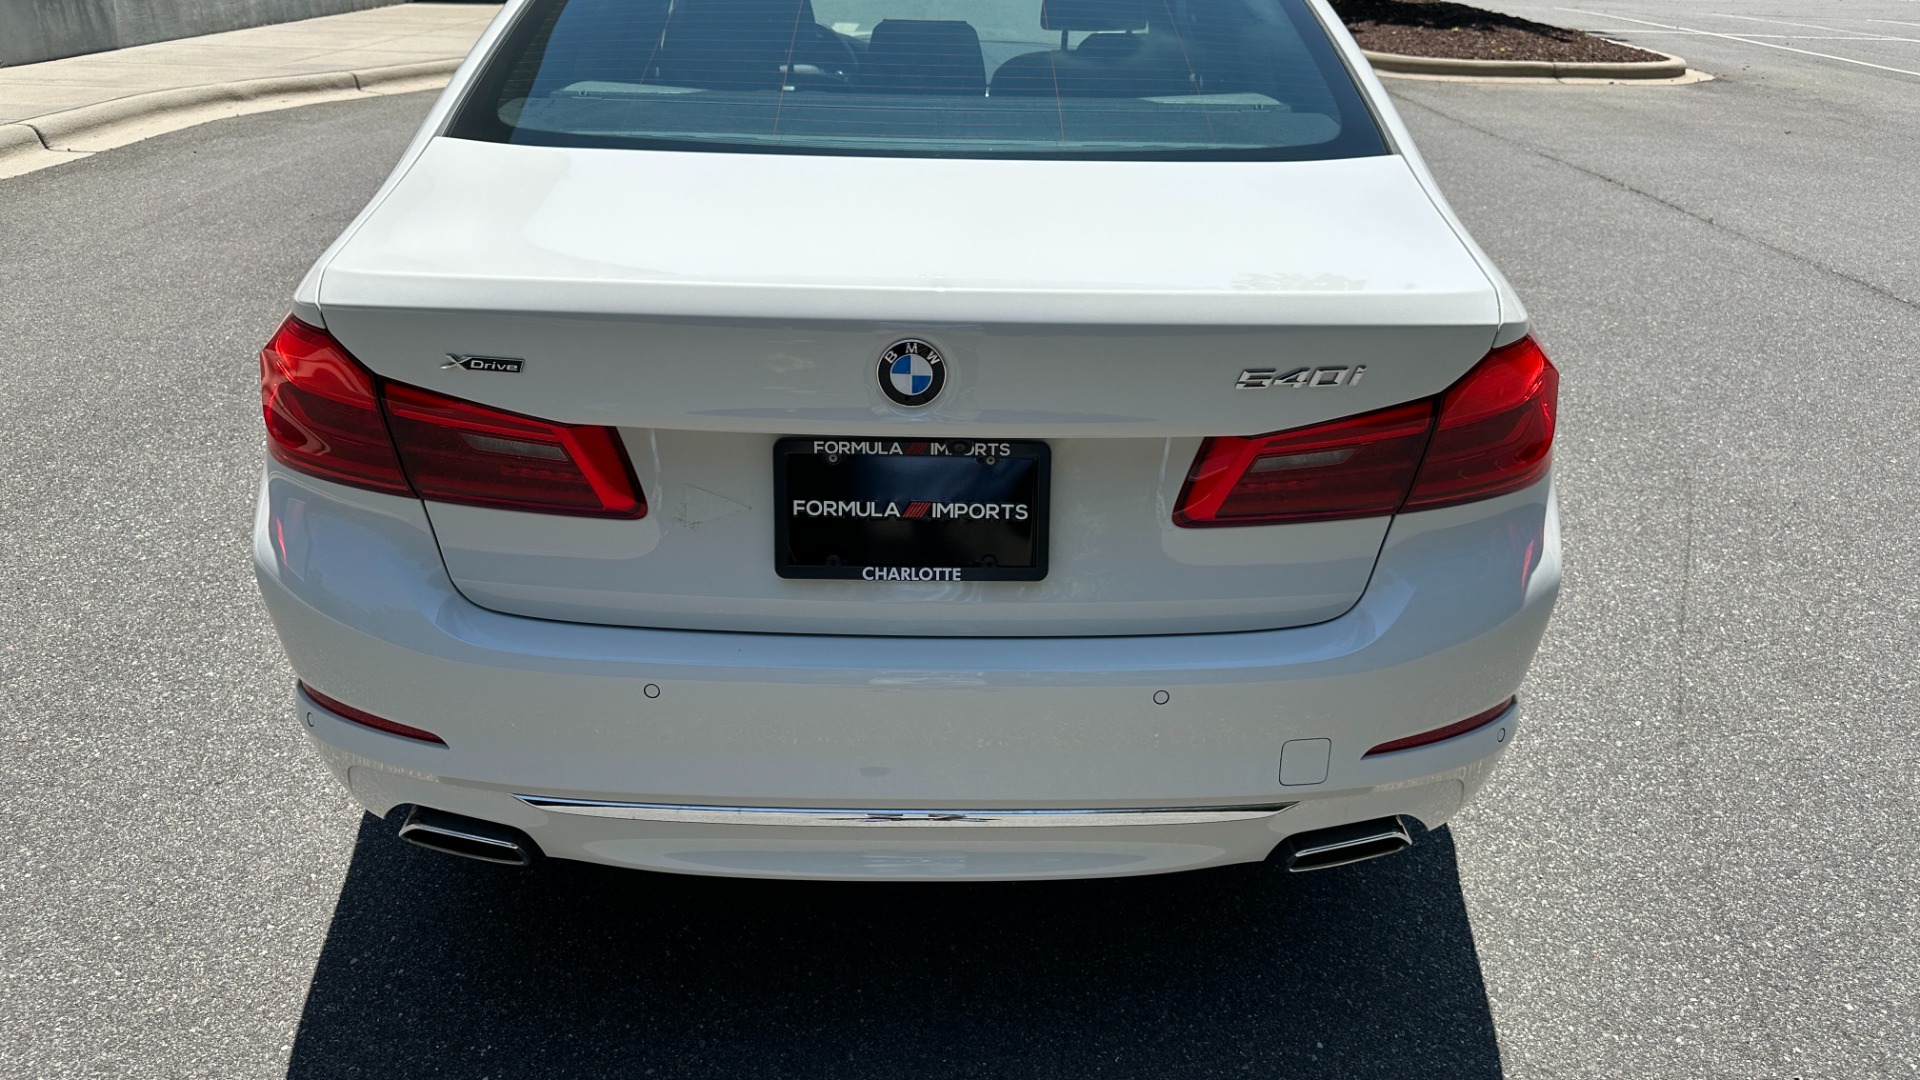 Used 2020 BMW 5 Series 540i xDrive / EXECUTIVE / LUXURY / HK SURROUND / NAPPA LEATHER for sale $45,995 at Formula Imports in Charlotte NC 28227 8